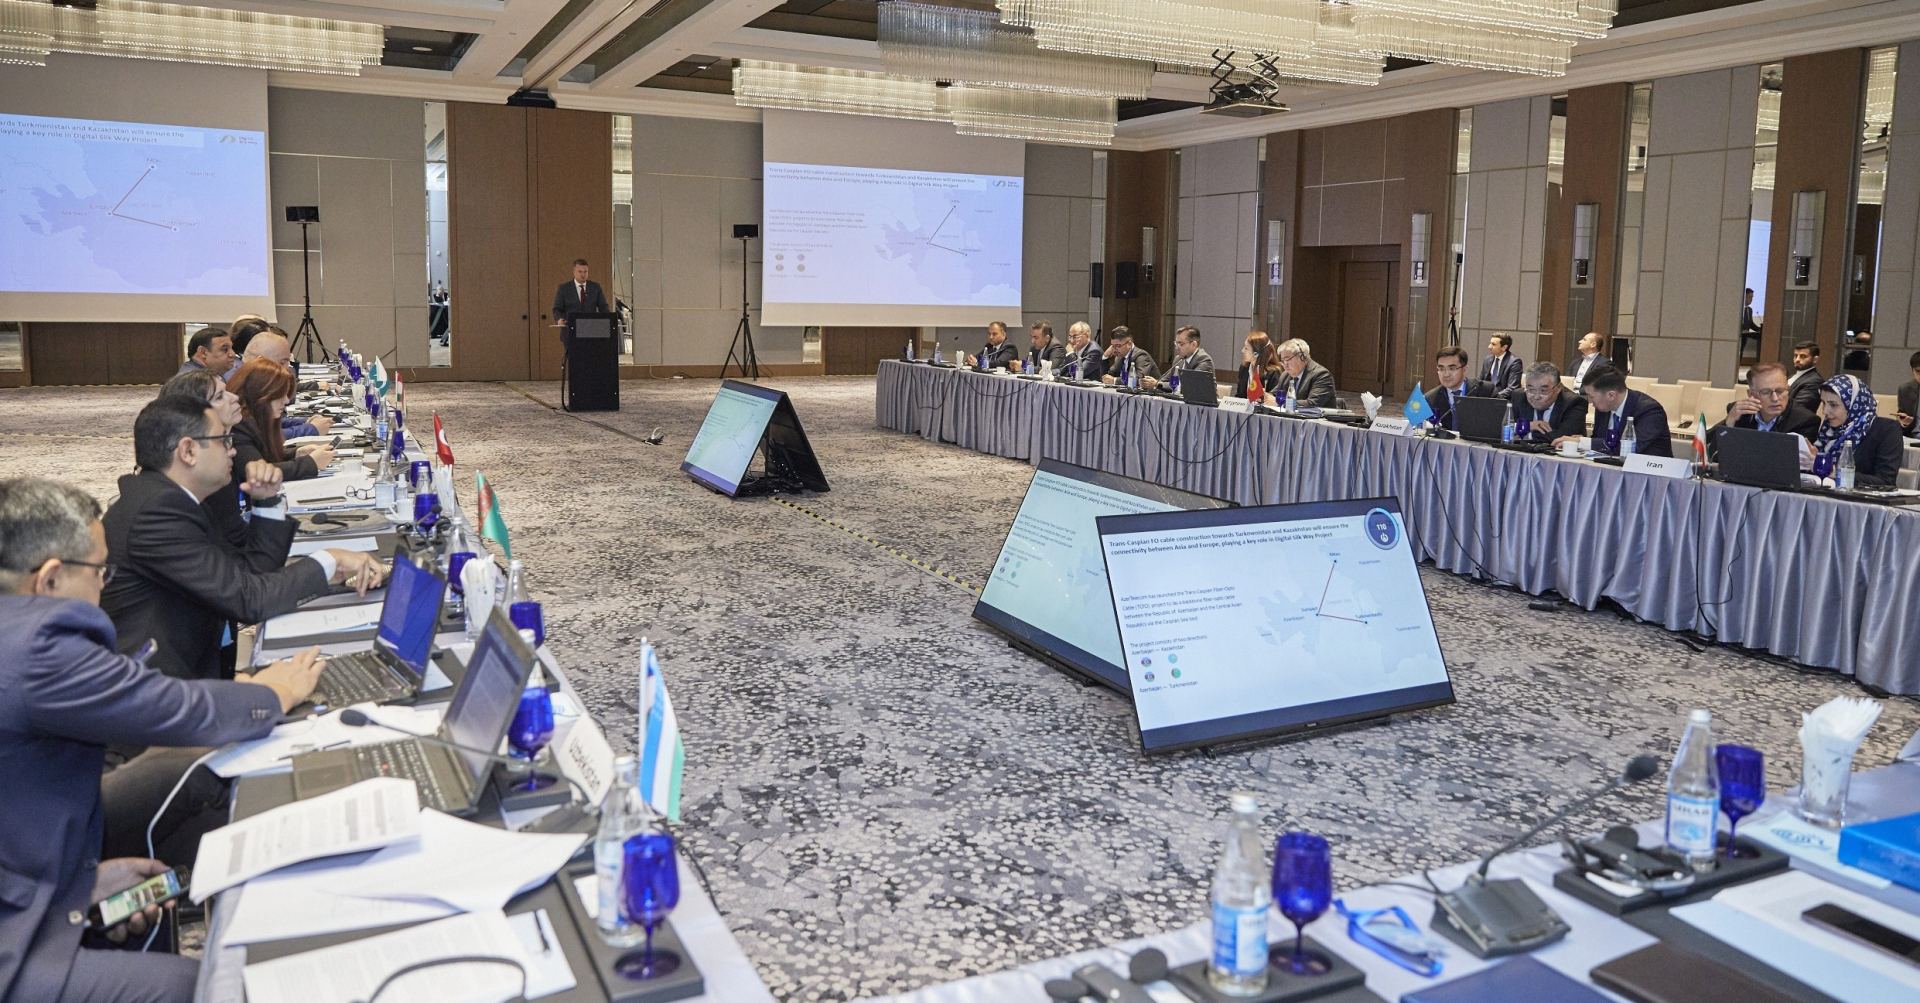 The Digital Silk Way project was presented at the event of Economic Cooperation Organization (PHOTO)